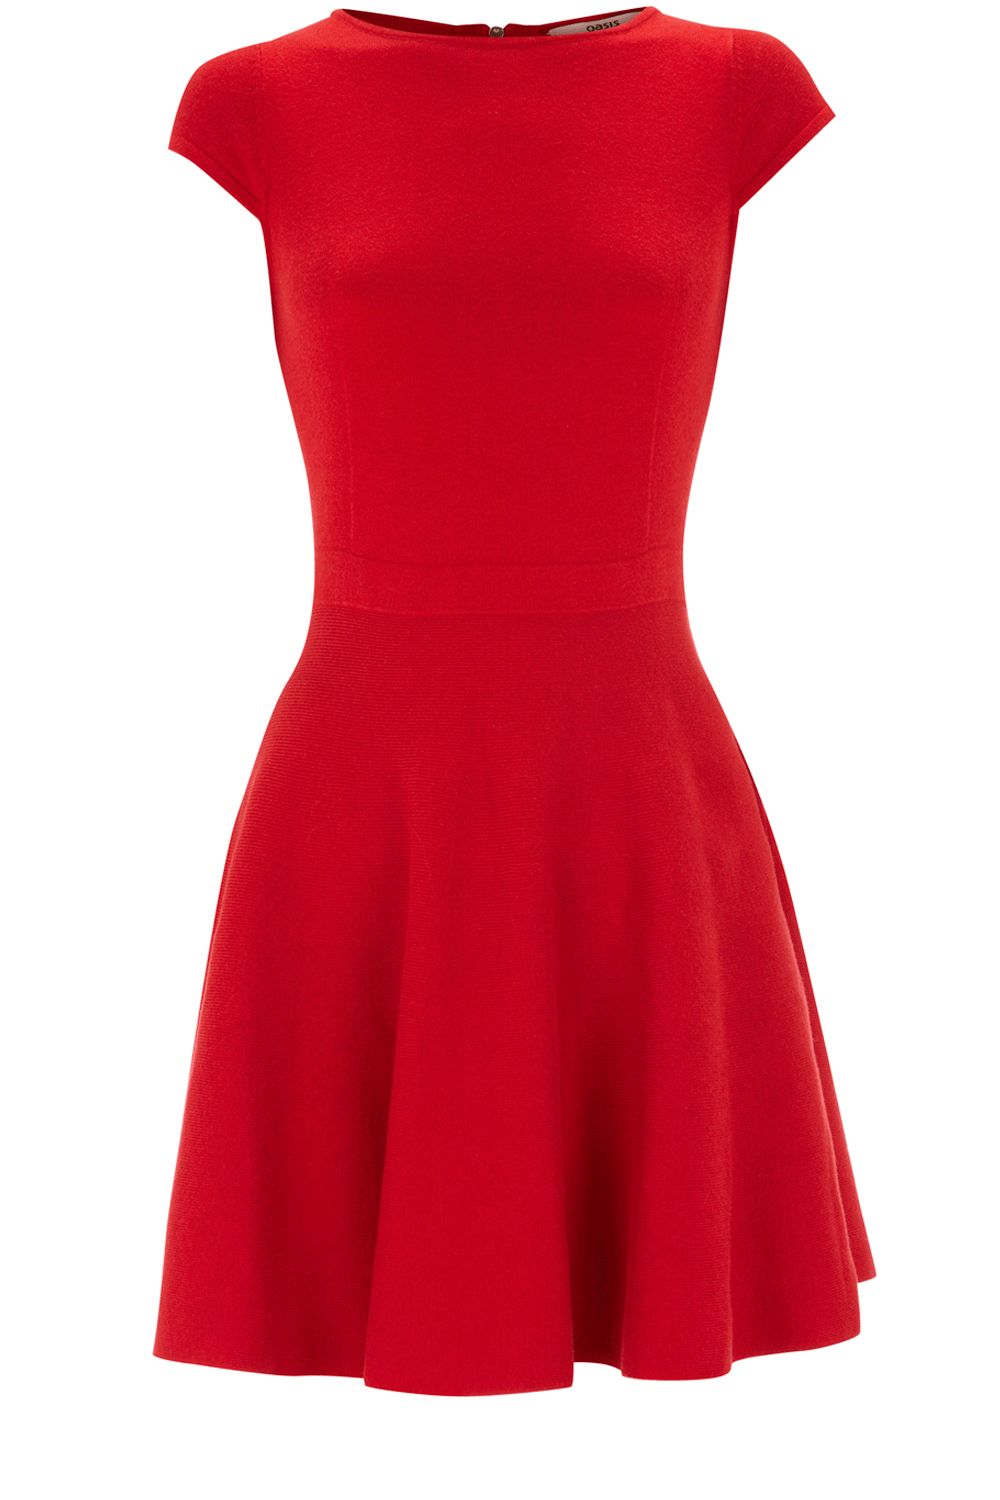 Oasis Fit and Flare Dress in Red | Lyst